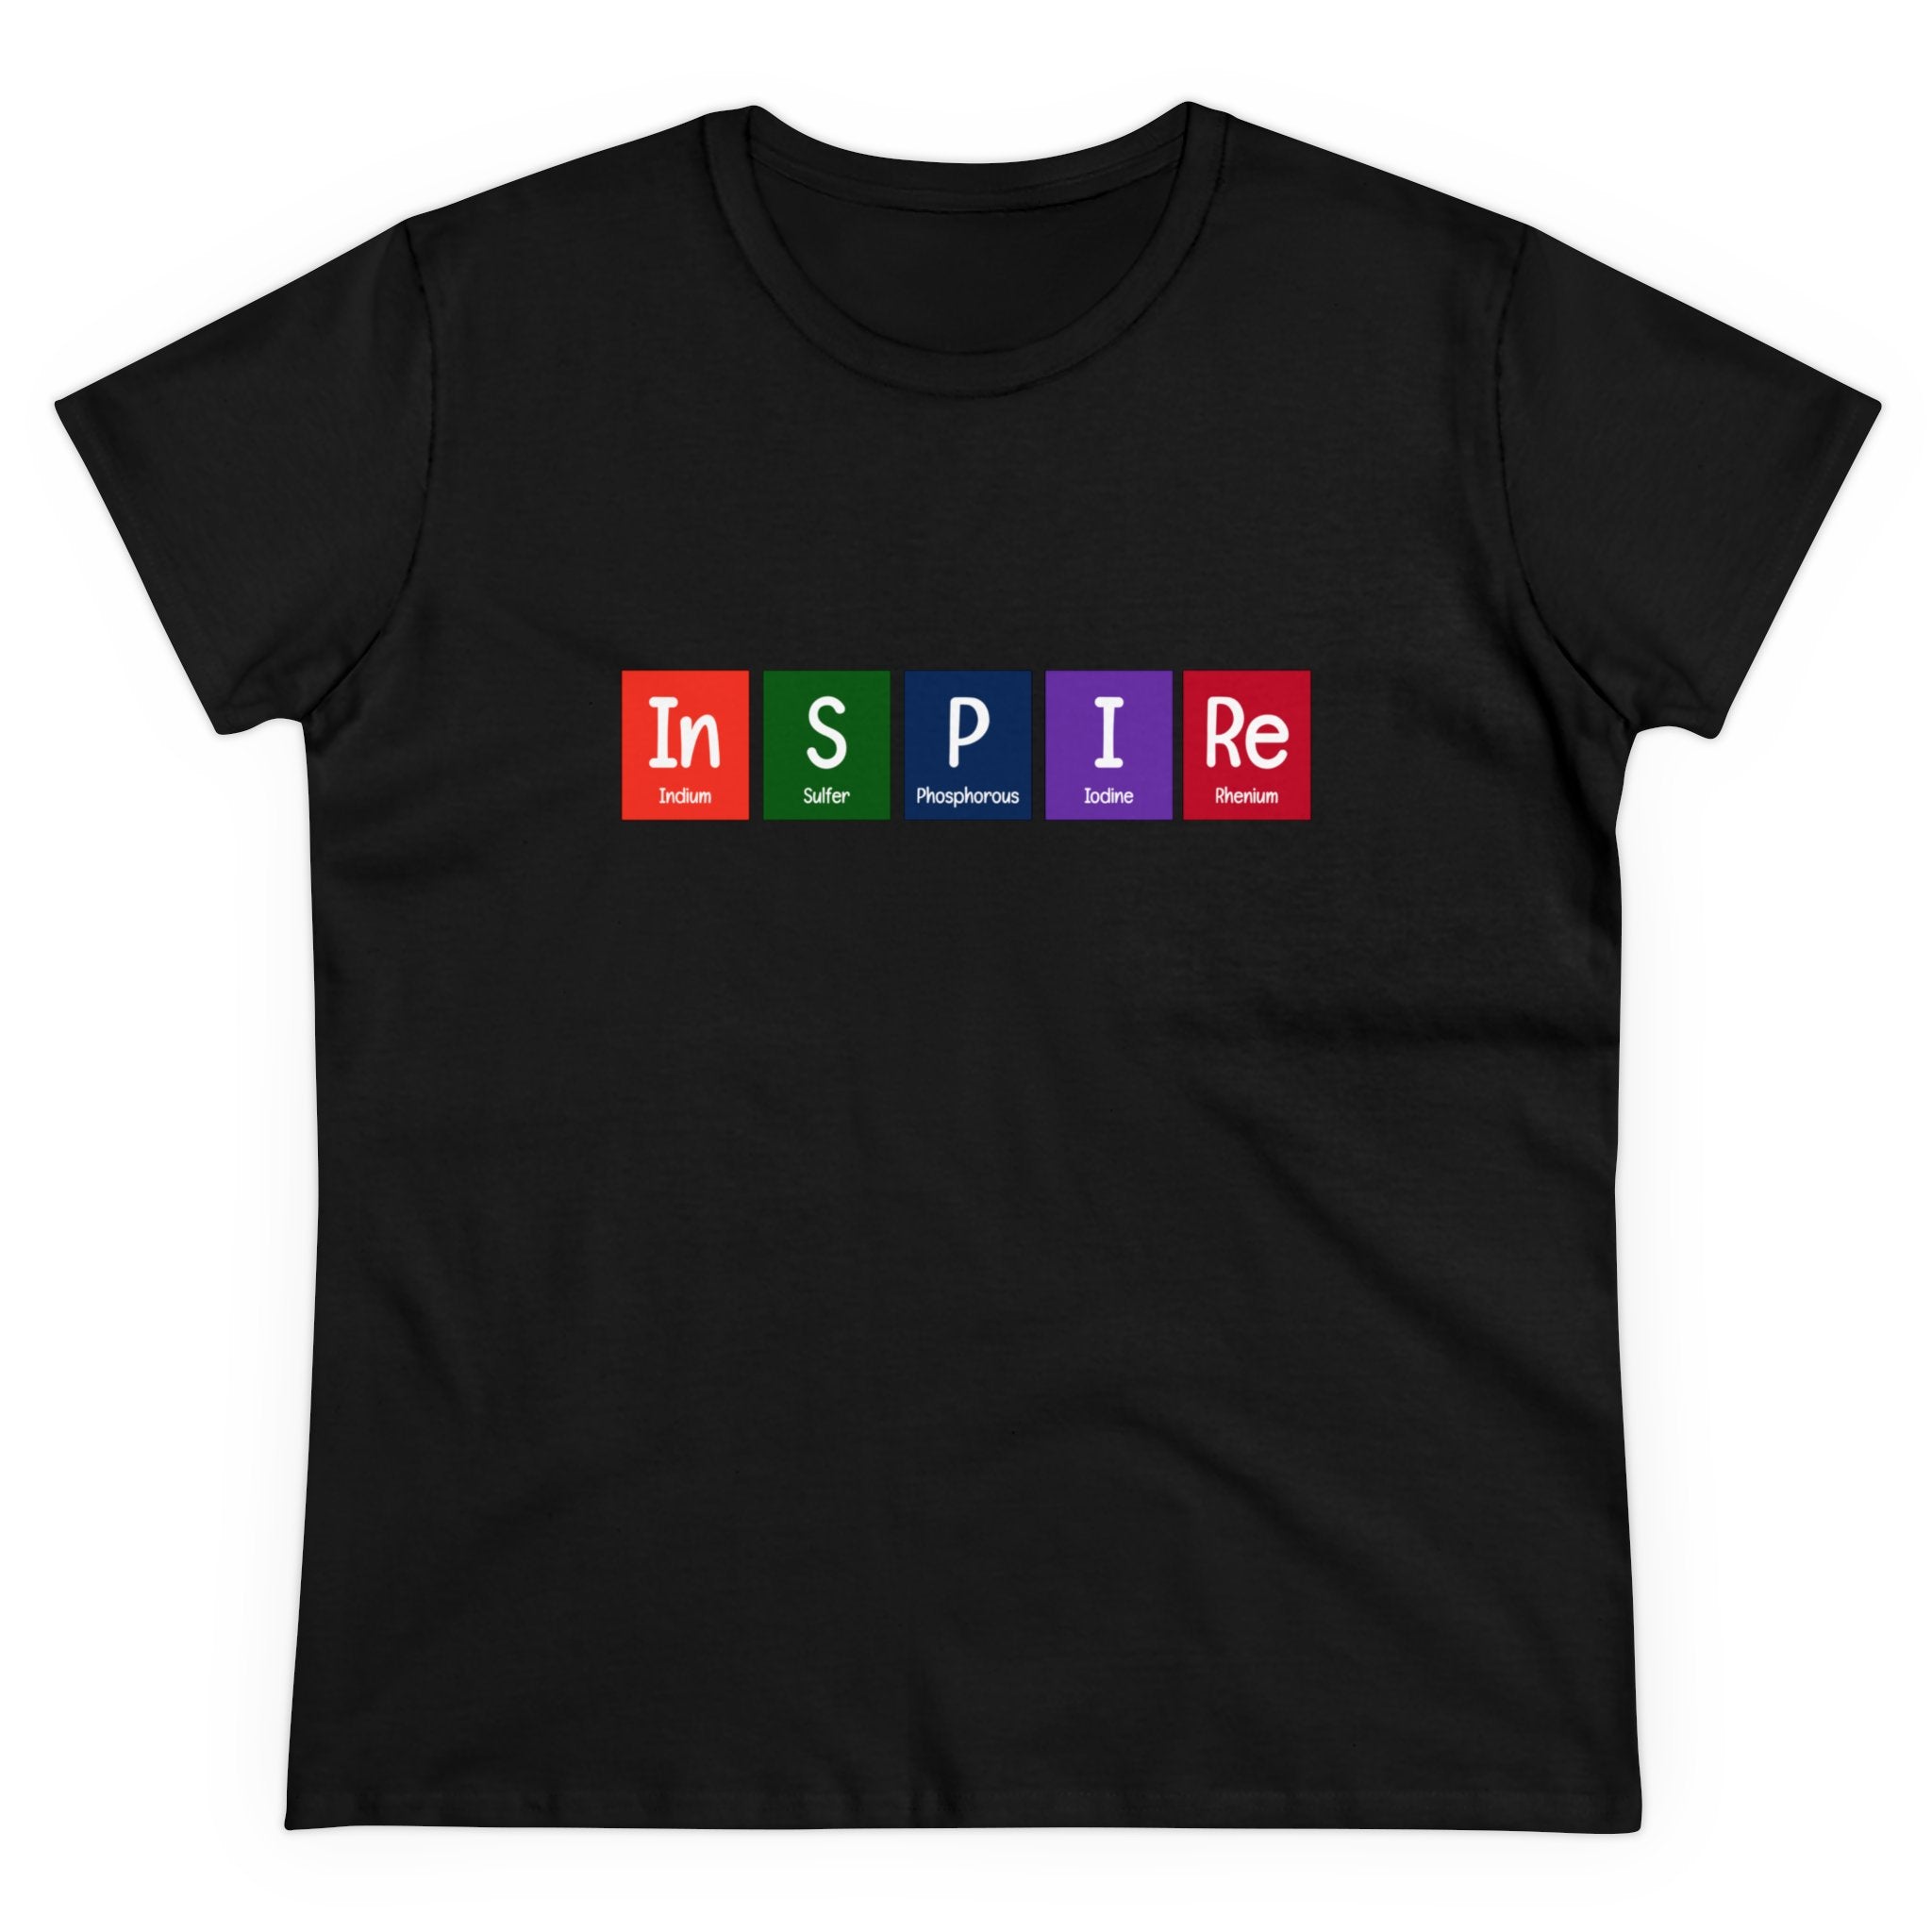 A stylish black In-S-P-I-Re - Women's Tee emblazoned with the word "INSPIRE," creatively spelled out using elements from the periodic table: Indium, Sulfur, Phosphorus, Iodine, and Rhenium. This shirt radiates positivity and science-inspired flair.